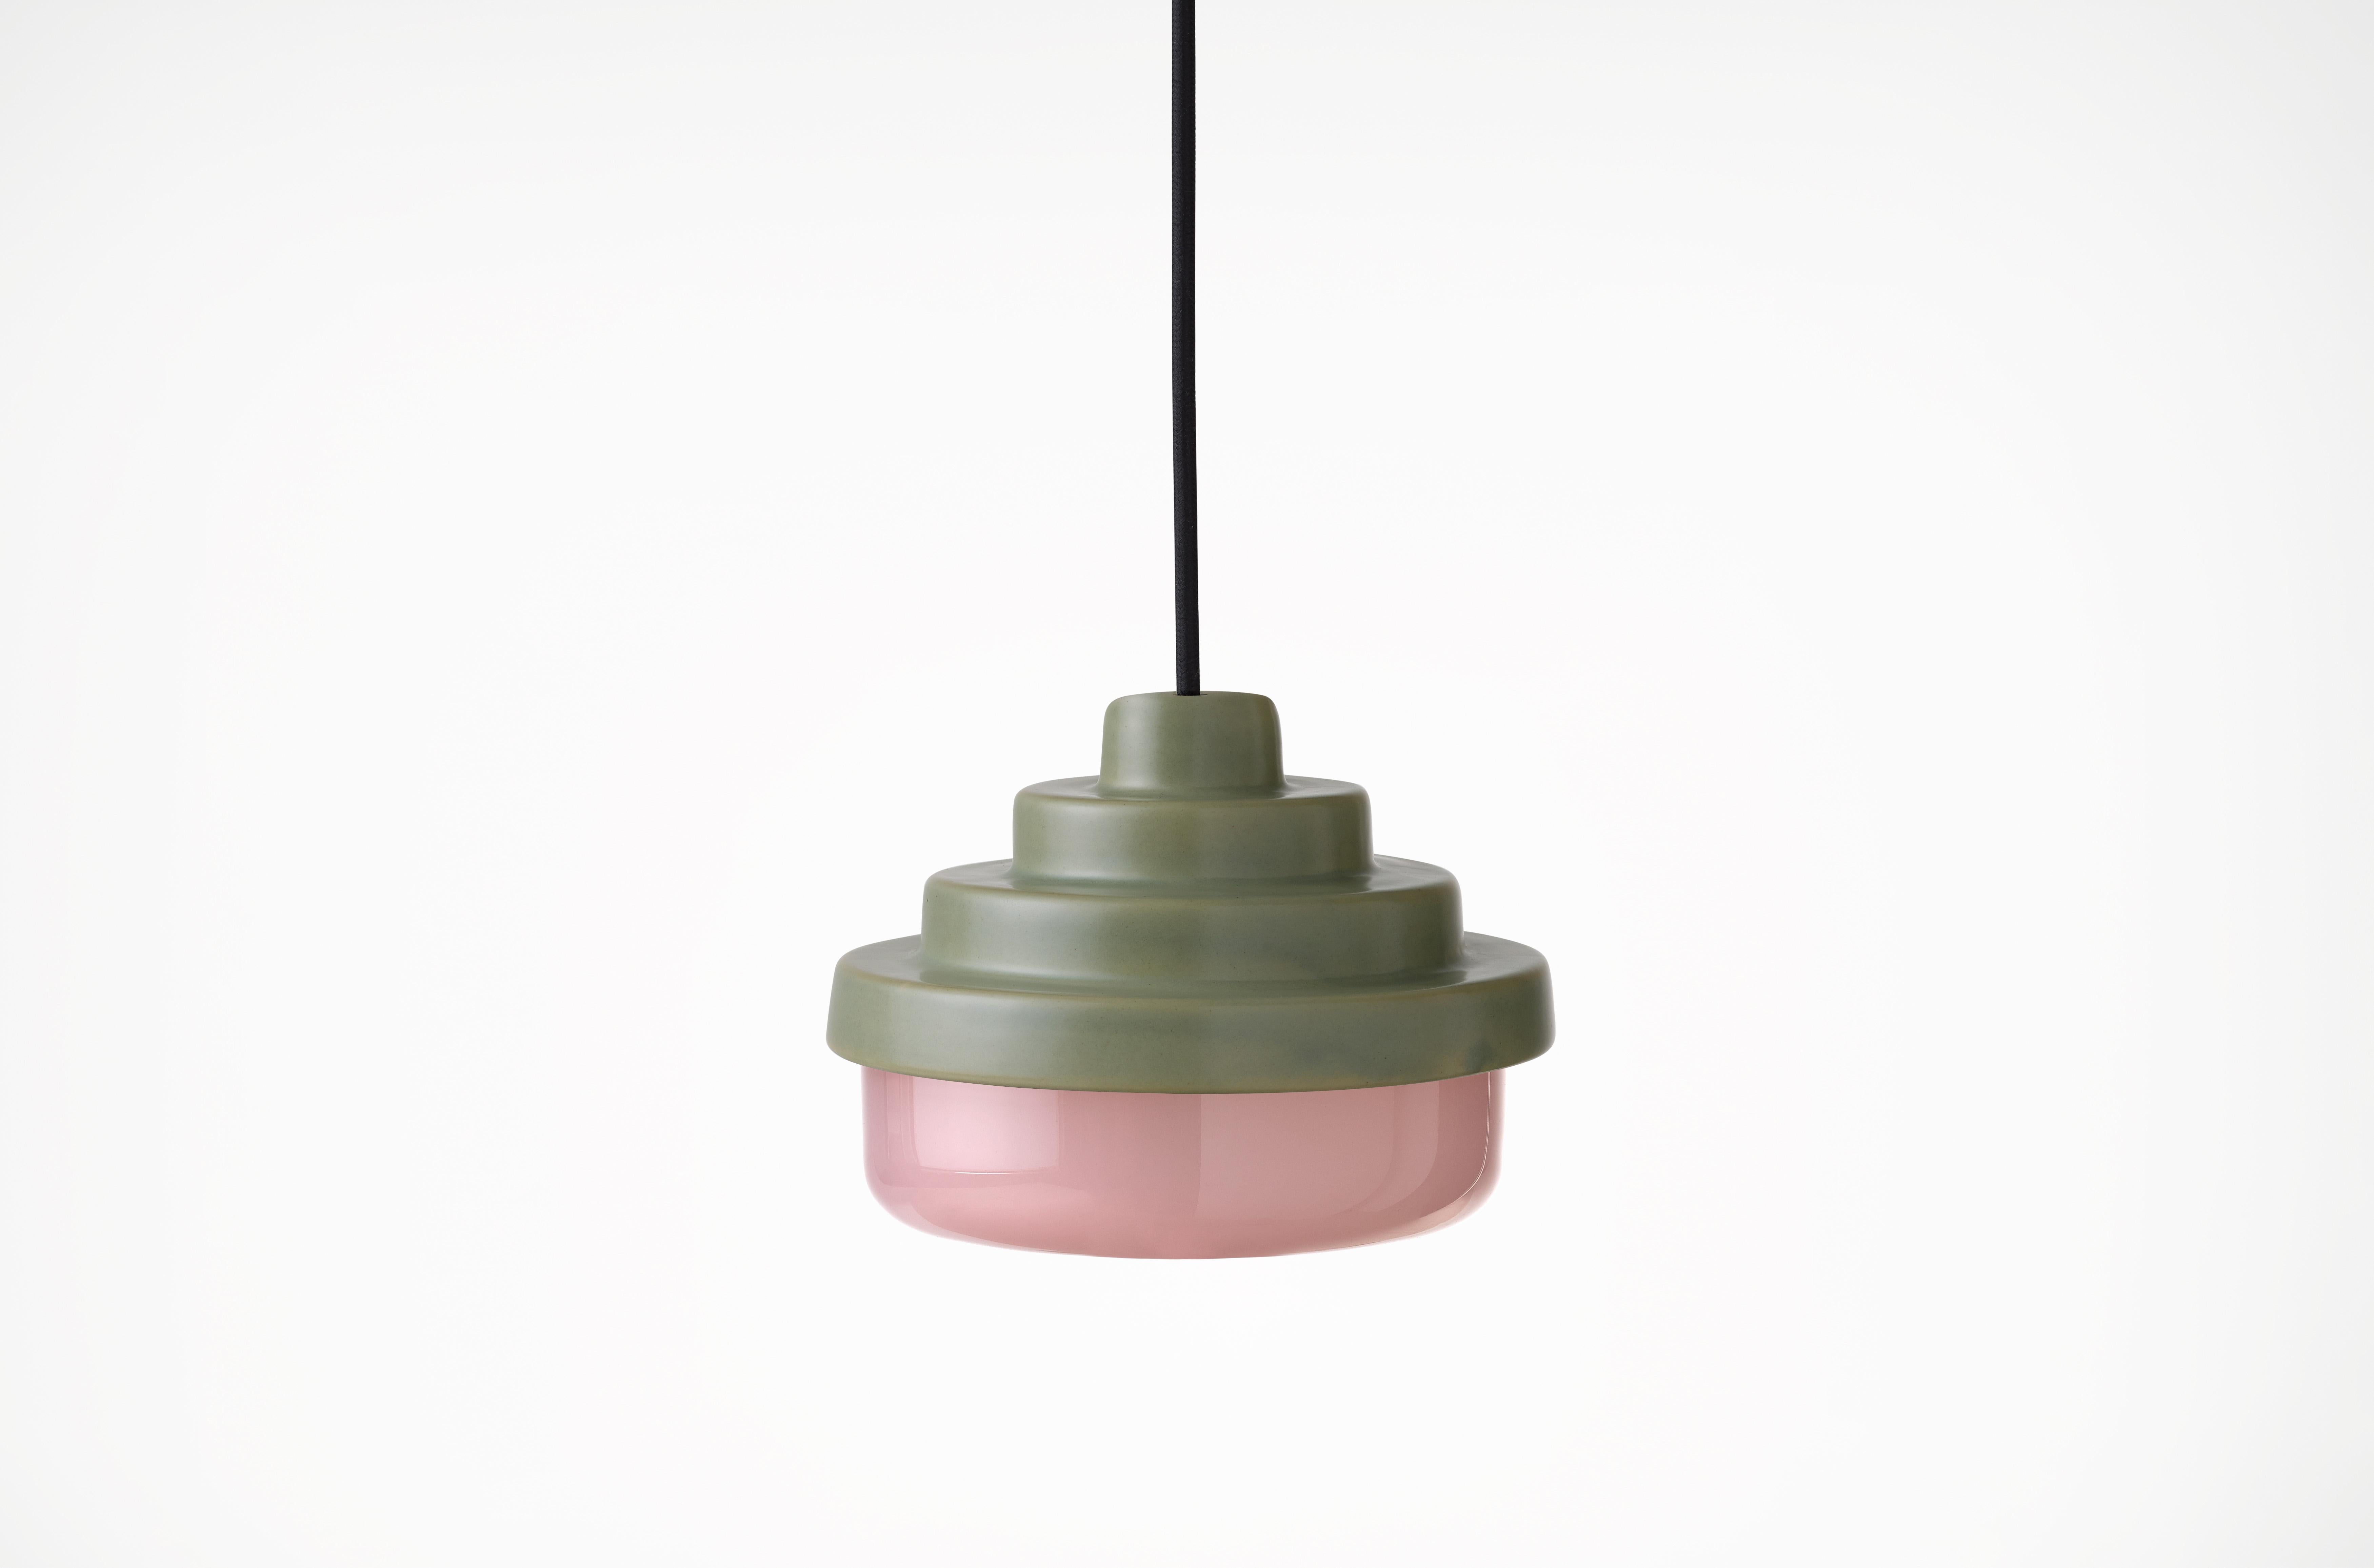 Green and Pink Honey Pendant Light by Coco Flip
Dimensions: D 18 x W 18 x H 13 cm
Materials: Slip cast ceramic stoneware with blown glass. 
Weight: Approx. 2kg
Glass finishes: Pink.
Ceramic finishes: Green satin glaze. 

Standard fixtures included
1